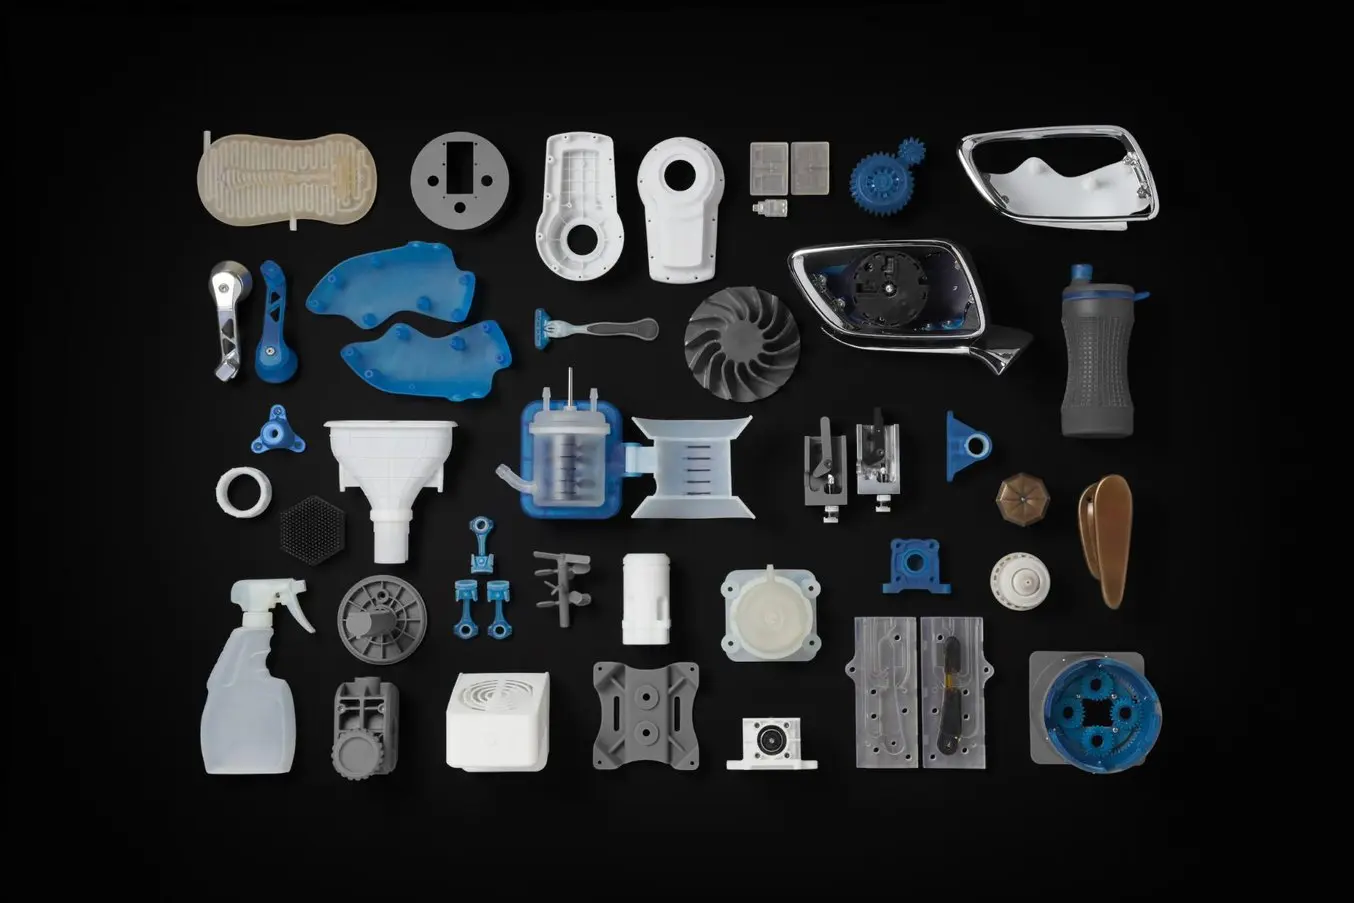 SLA 3D printers offer diverse materials for engineering and manufacturing applications.